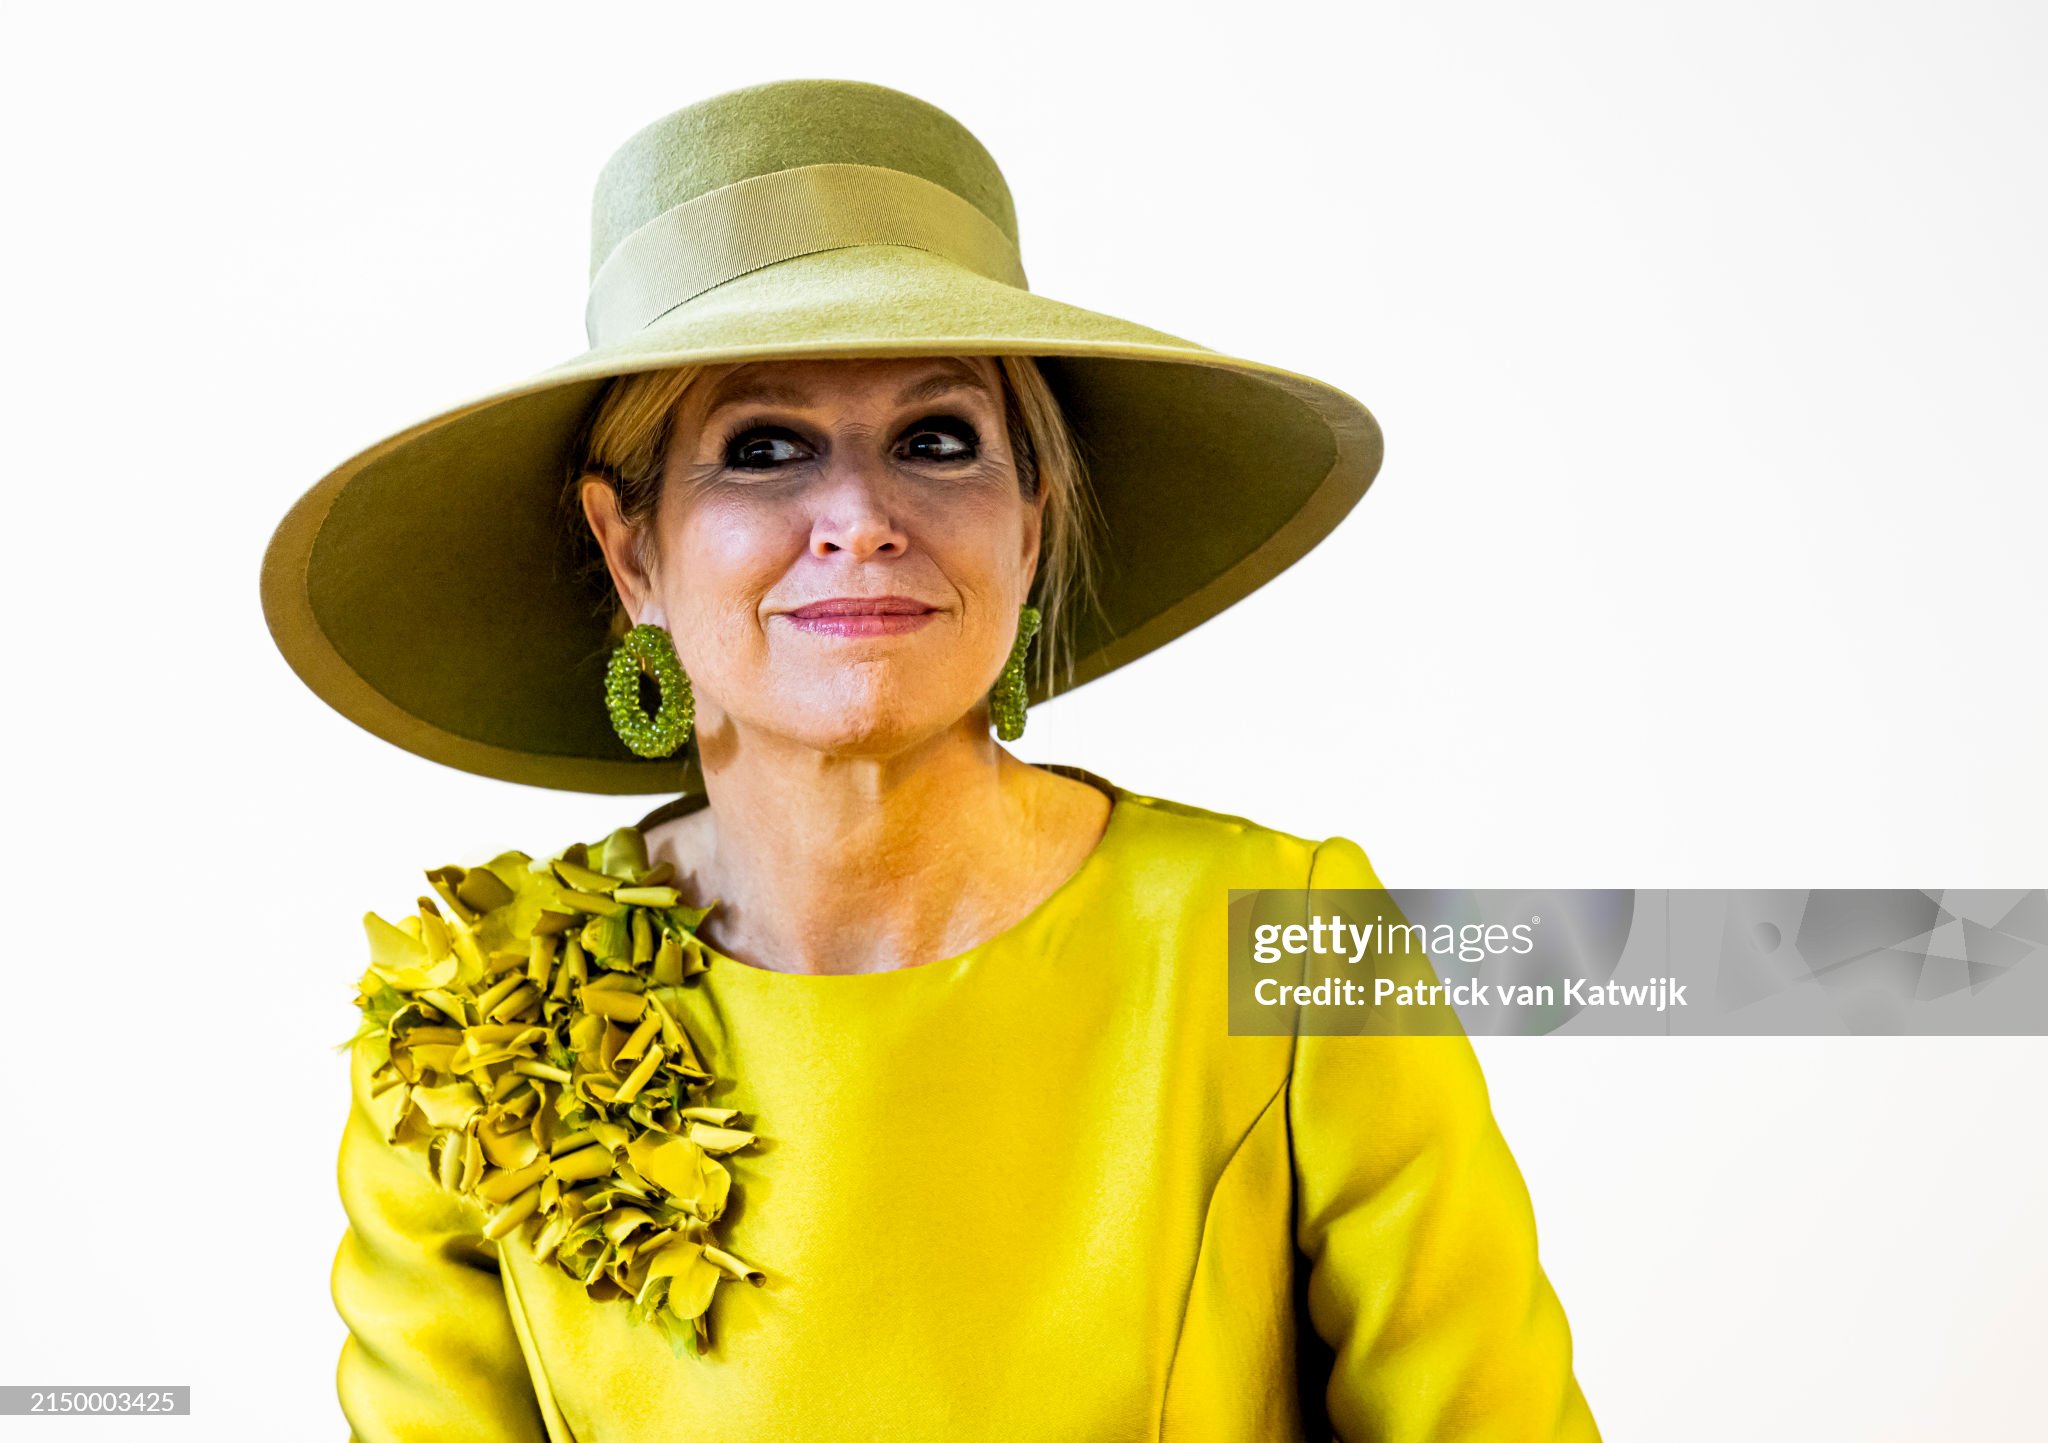 queen-maxima-of-the-netherlands-attends-the-10th-anniversary-language-in-the-hague.jpg?s=2048x2048&w=gi&k=20&c=3qz43_m-d9Mp9rwevzij7QNPzhVmDDzuDlGrNvgbPfY=